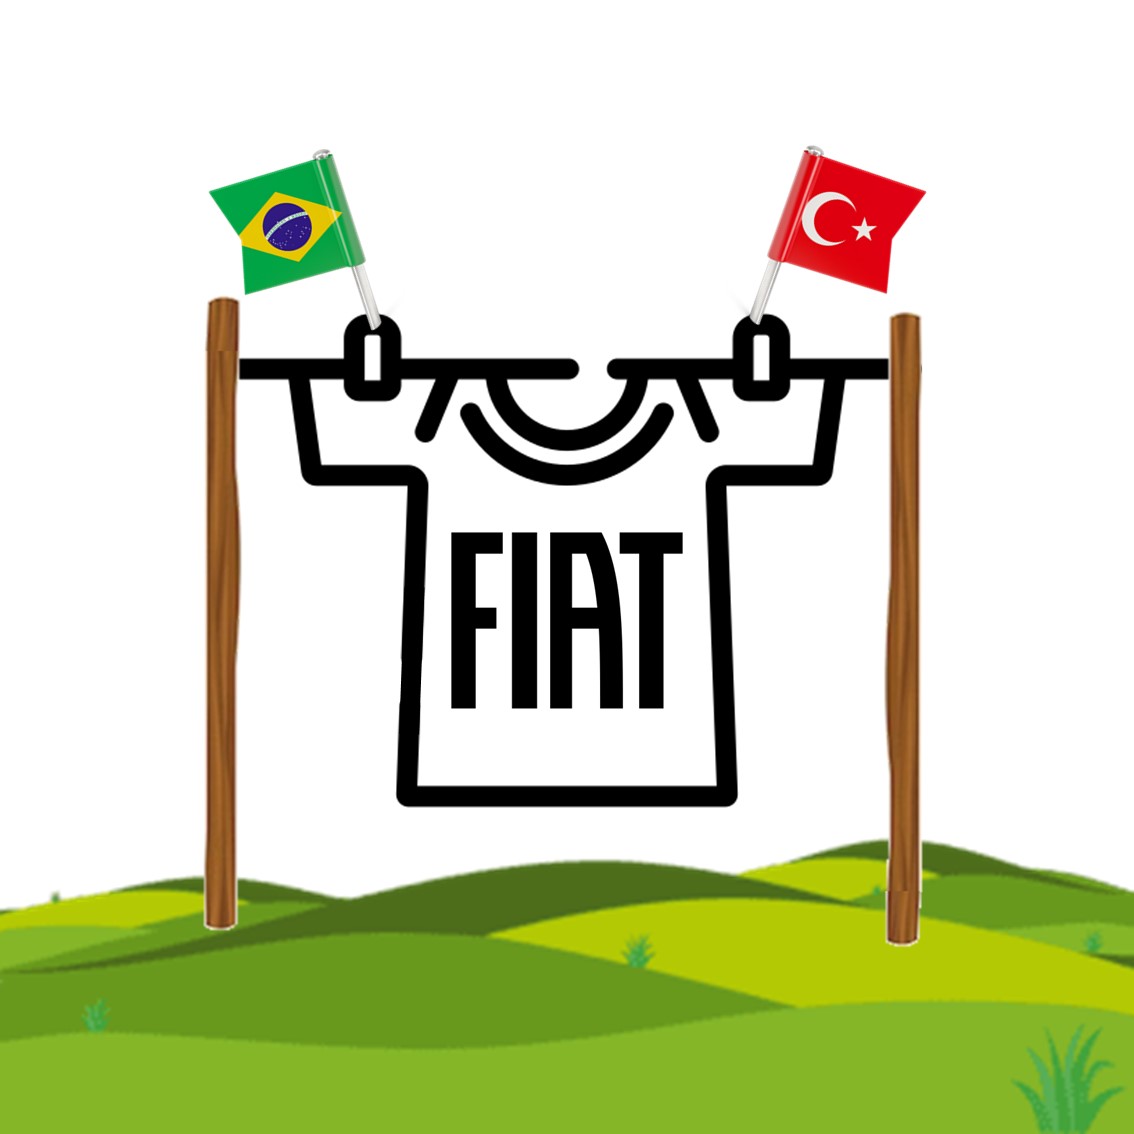 Brazil and Turkiye are the markets that keep Fiat alive. Not Italy. Fiat brand 2023 results in my website: fiatgroupworld.com/2024/03/27/fia…